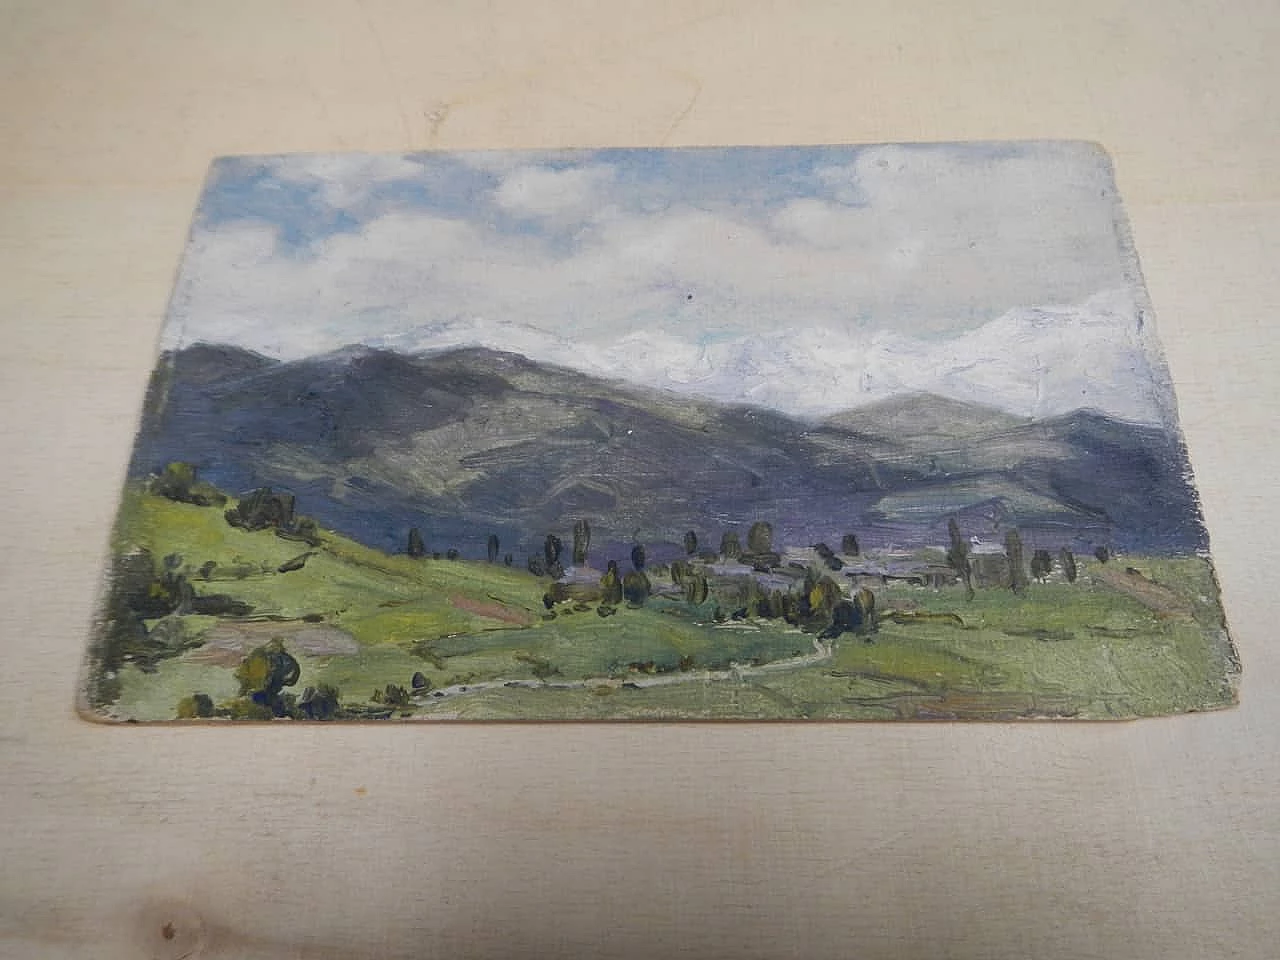 Des Champs, Pyrenees, painting on wood, early 20th century 8